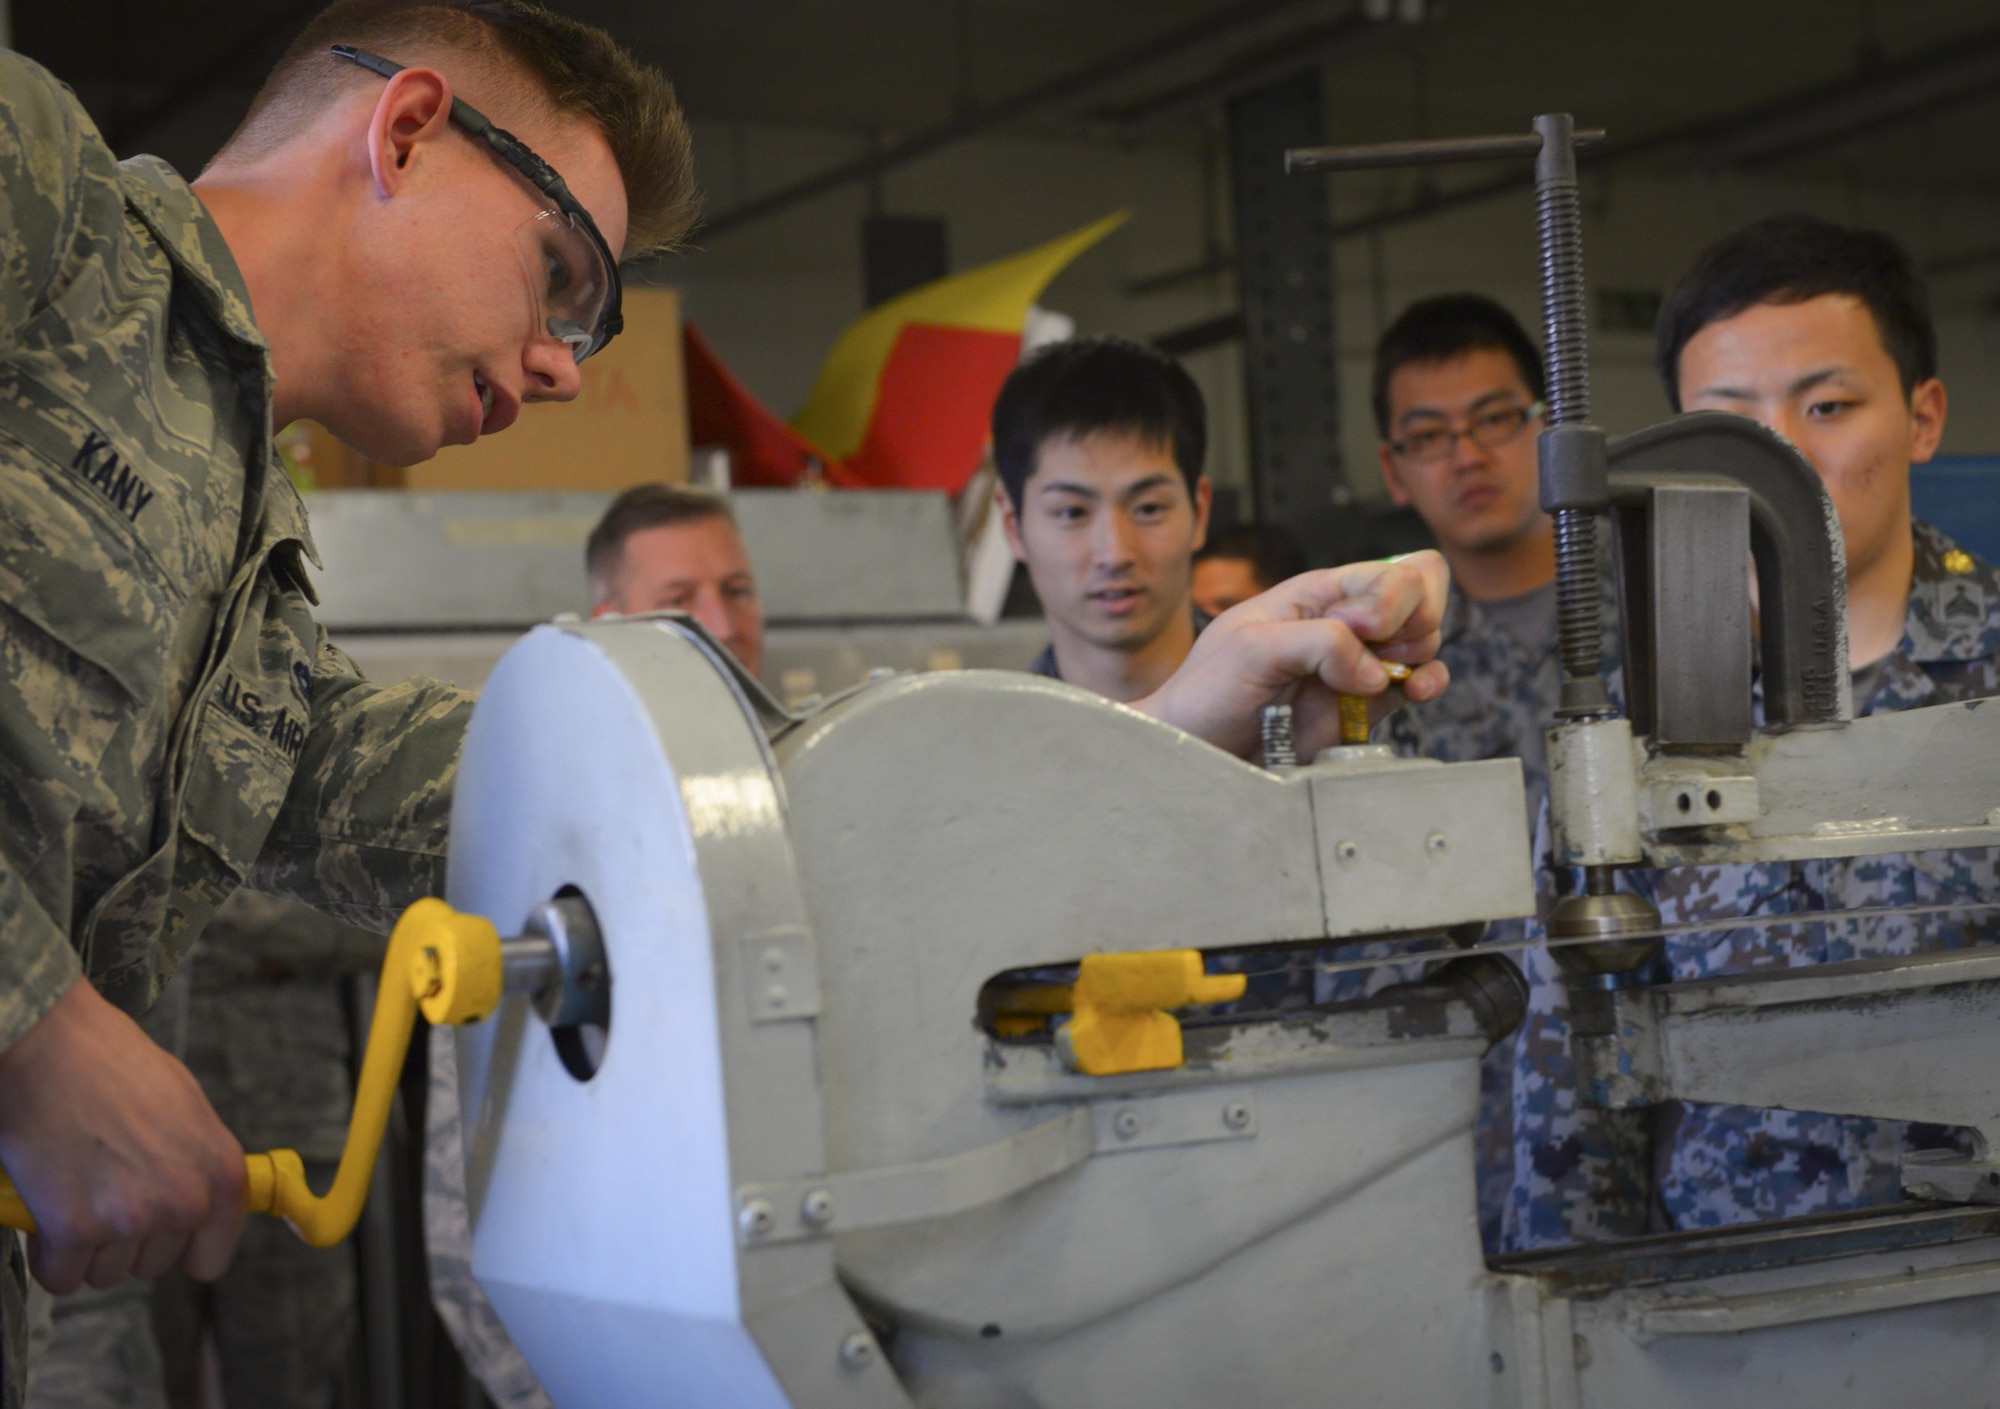 Airman 1st Class Frank Kany, 374th Maintenance Squadron fabrication flight aircraft structural journeyman, demonstrates a machine for cutting holes in sheet metal at Japan Air Self Defense Force maintenance officers-in-training at Yokota Air Base, Japan, Jan. 25, 2017. The officers-in-training interacted with Yokota Airmen, asked questions and witnessed firsthand how maintenance operates at Yokota. Interactive bilateral visits are designed to strengthen Japan-U.S. relations and improve how they operate together. (U.S. Air Force photo by Senior Airman Elizabeth Baker)